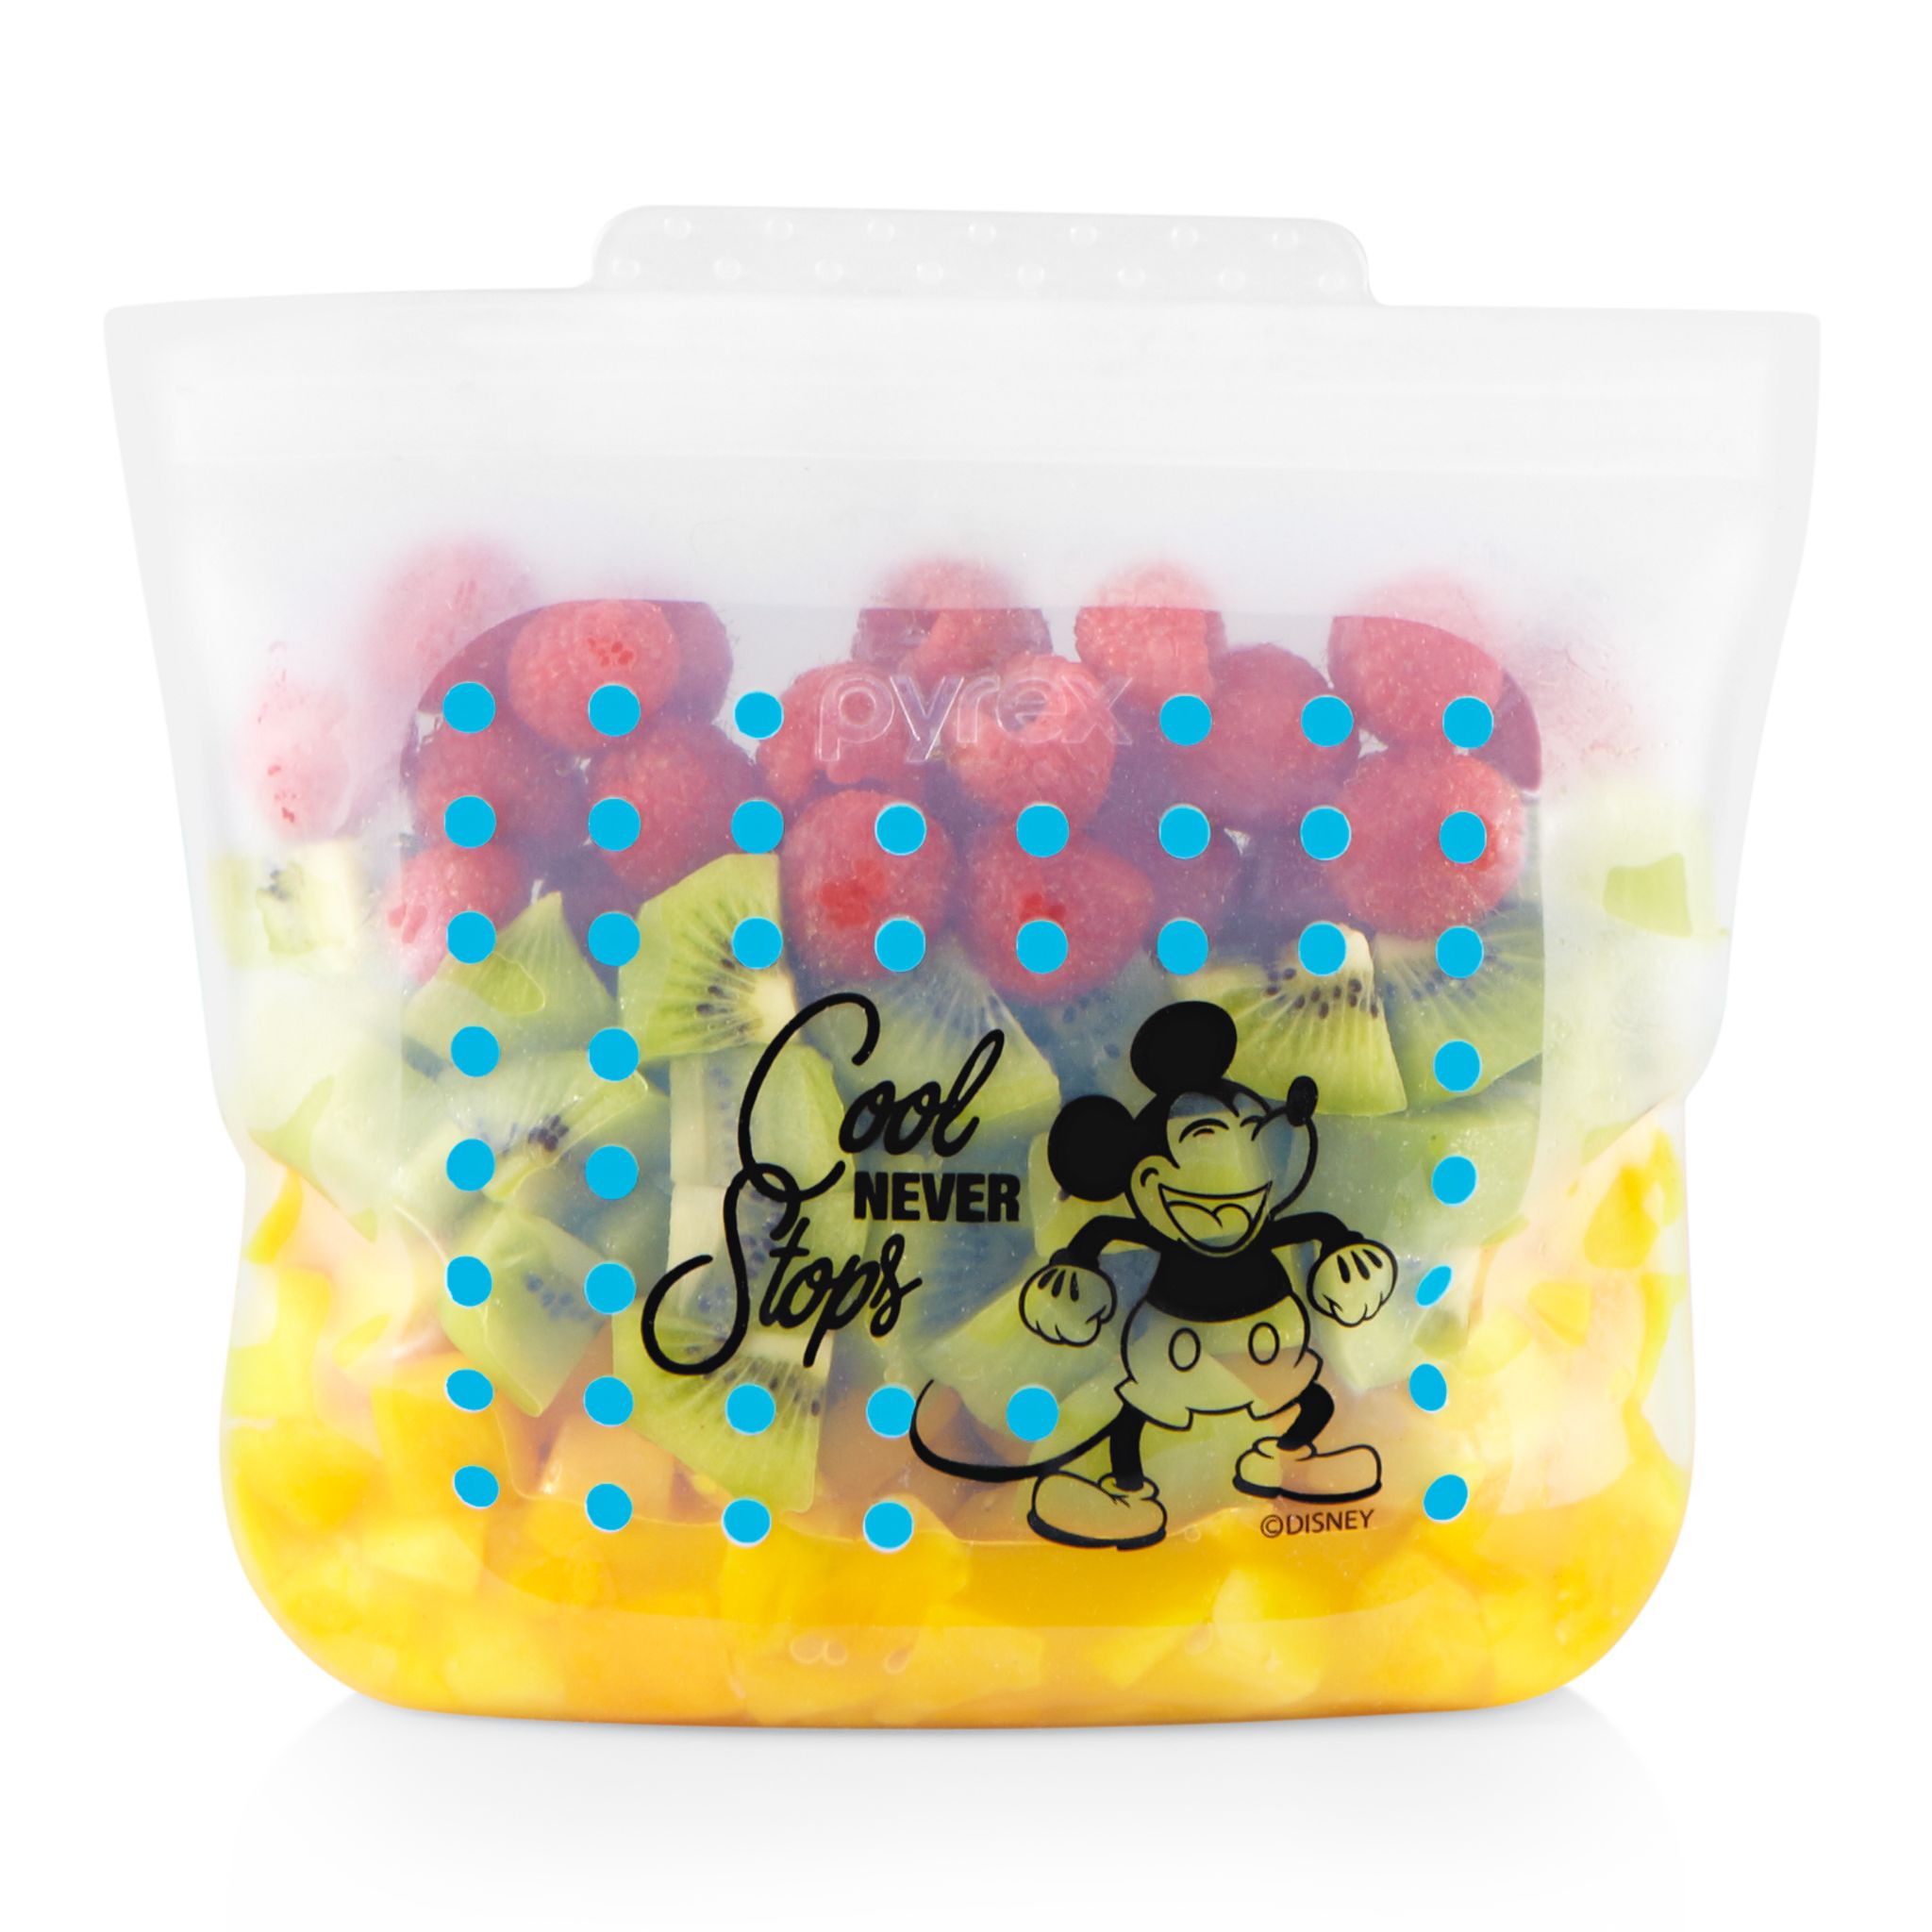 Sandwich Size Silicone Storage Bag: Disney Mickey Mouse - Cool Never Stops